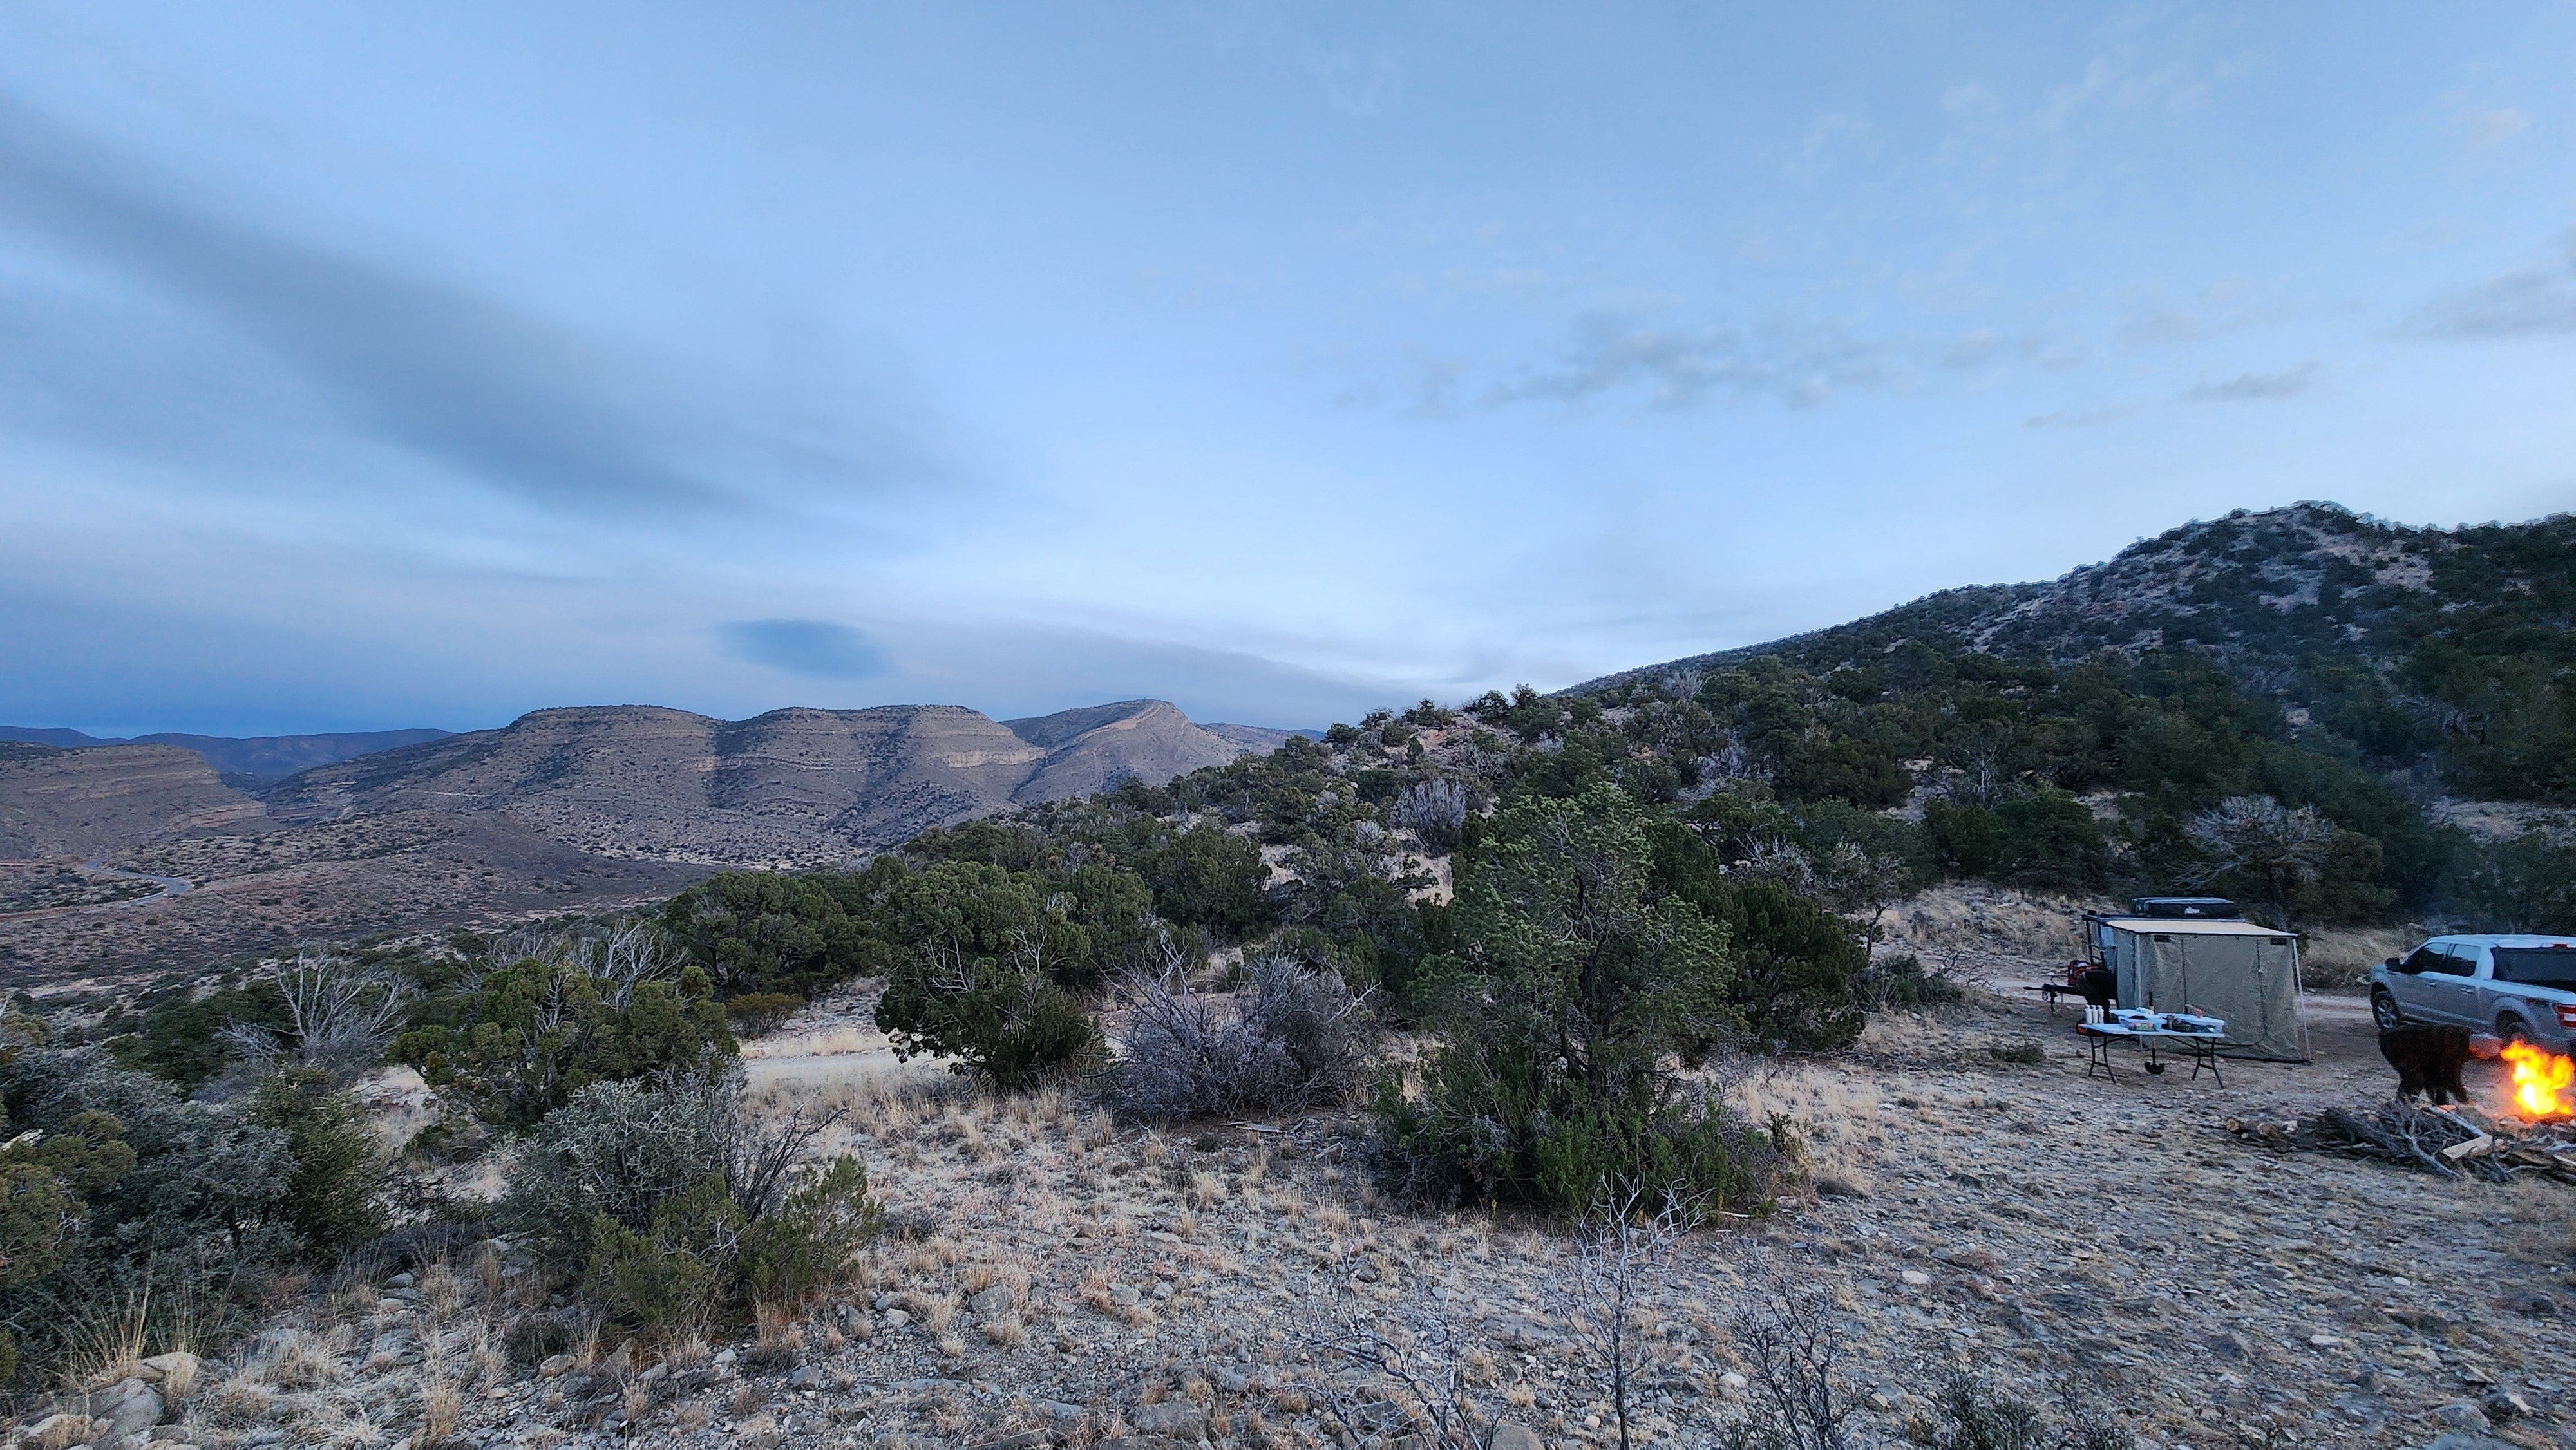 Camper submitted image from Dry Canyon Near Hang Glider Launch - 3